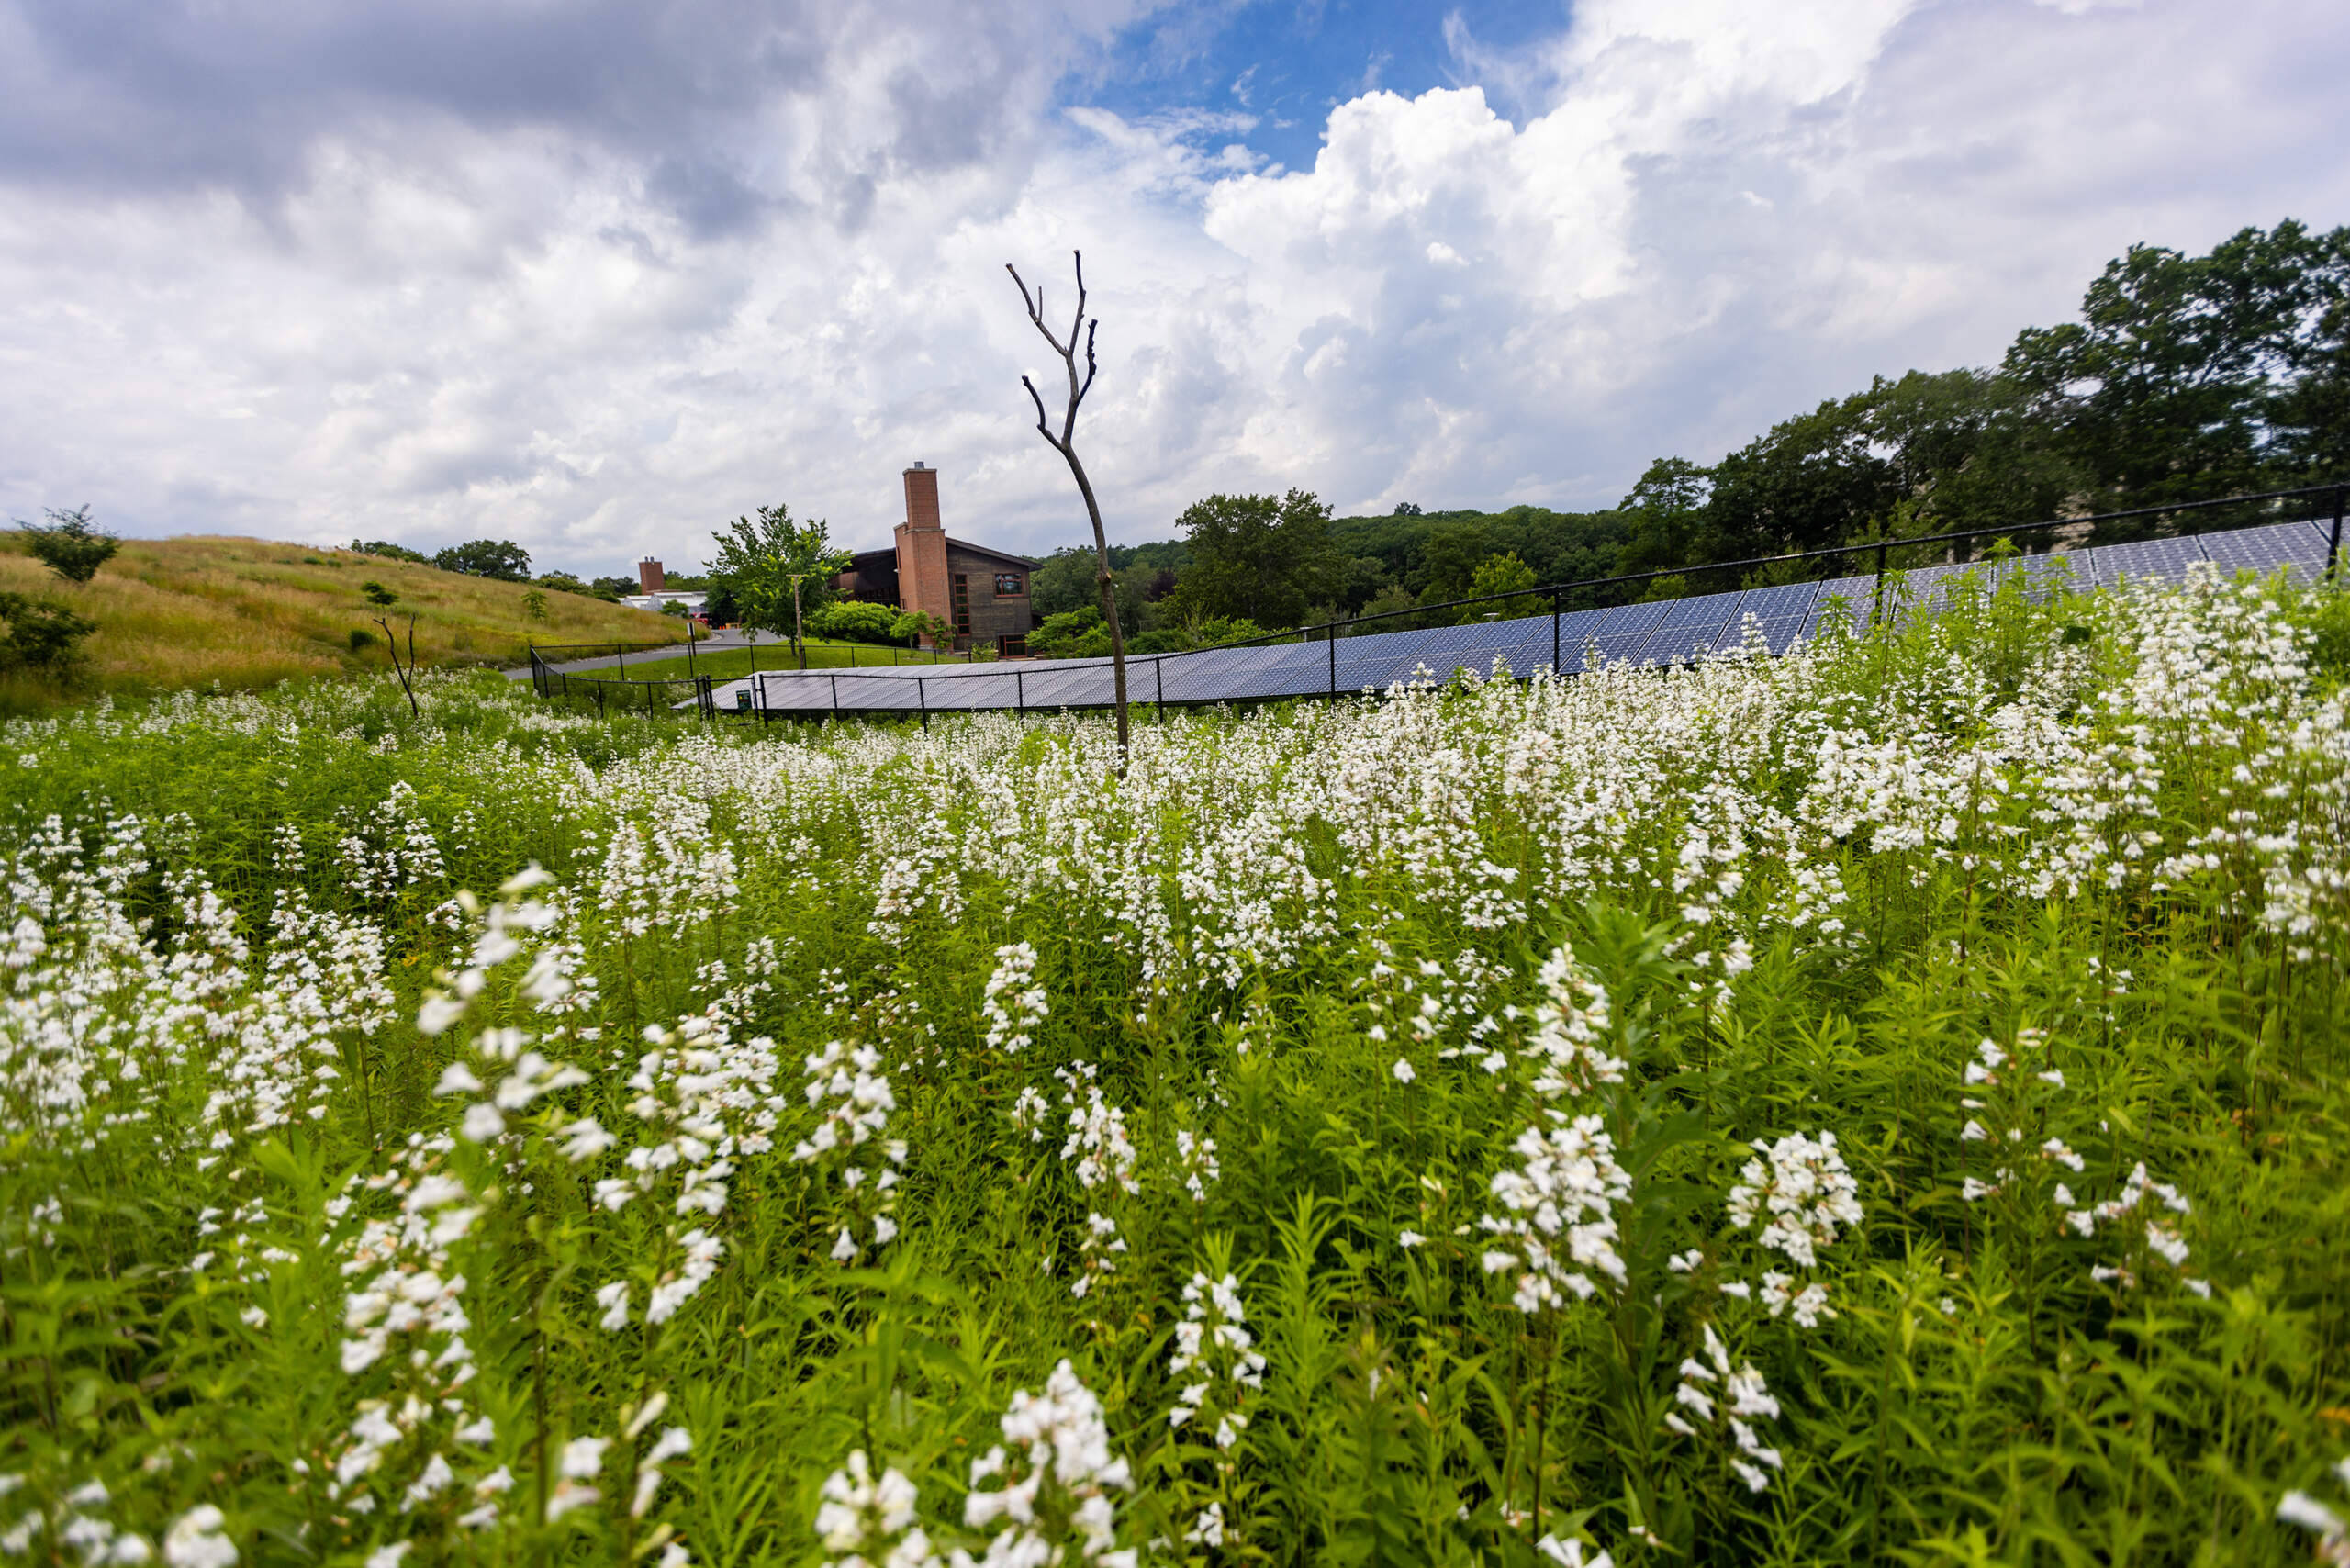 The pollinator garden blooming with foxglove beardtongue at the Weld Research Building of the Arnold Arboretum. (Jesse Costa/WBUR)